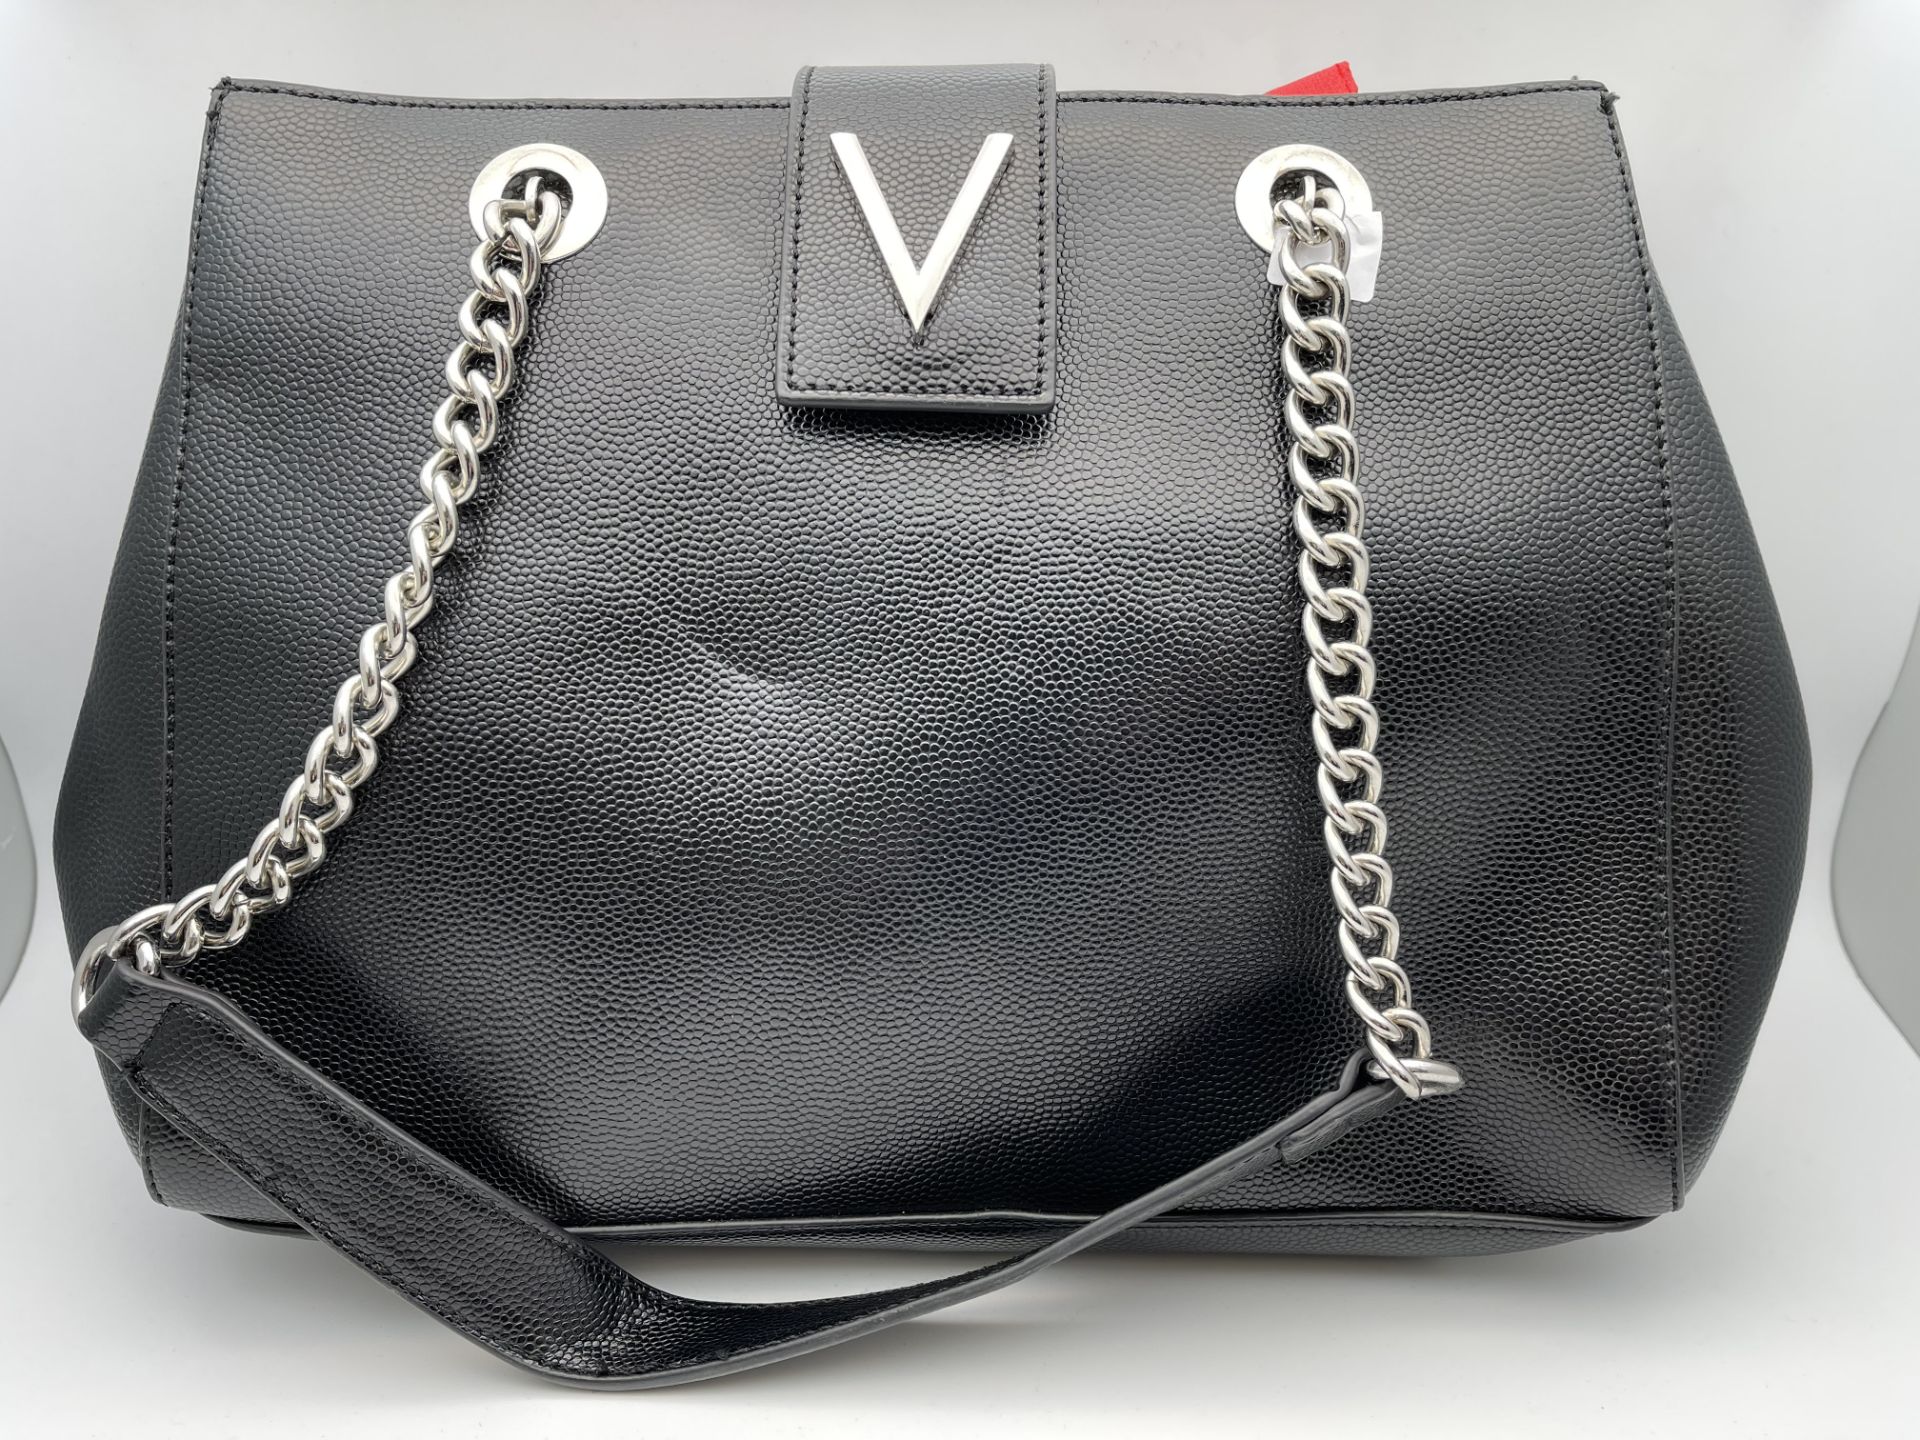 LADIES MARIO VALENTINO BLACK LEATHER HANDBAG, INCLUDES RED DUSTBAG, APPEARS NEW, RRP-£170.